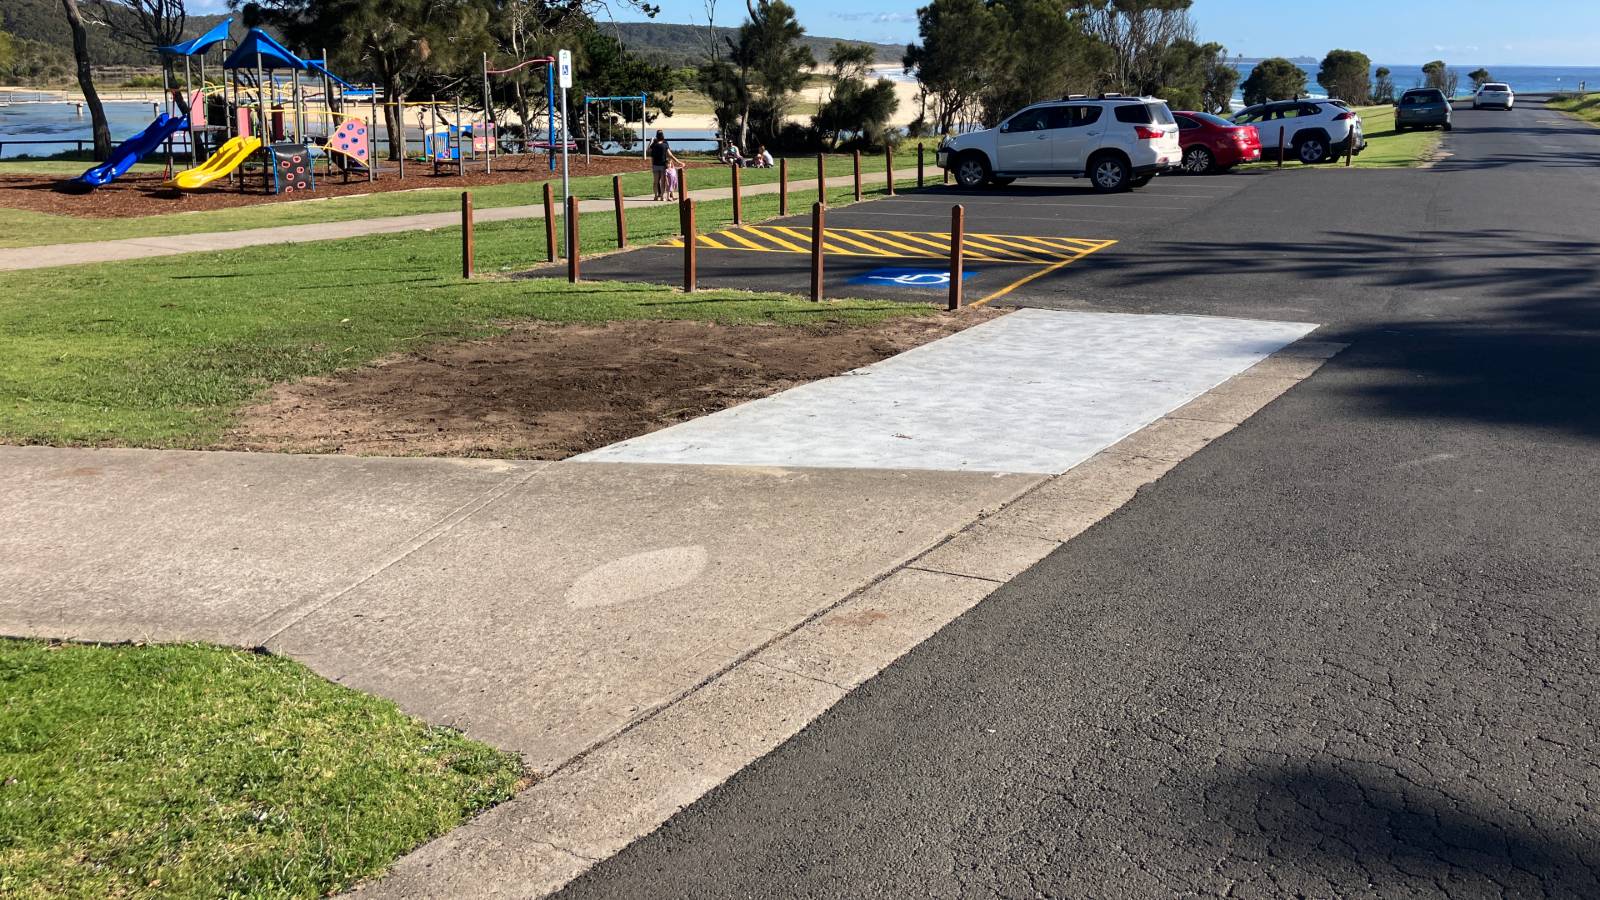 Image Wheelchair access to Dalmeny playground from disabled carpark.